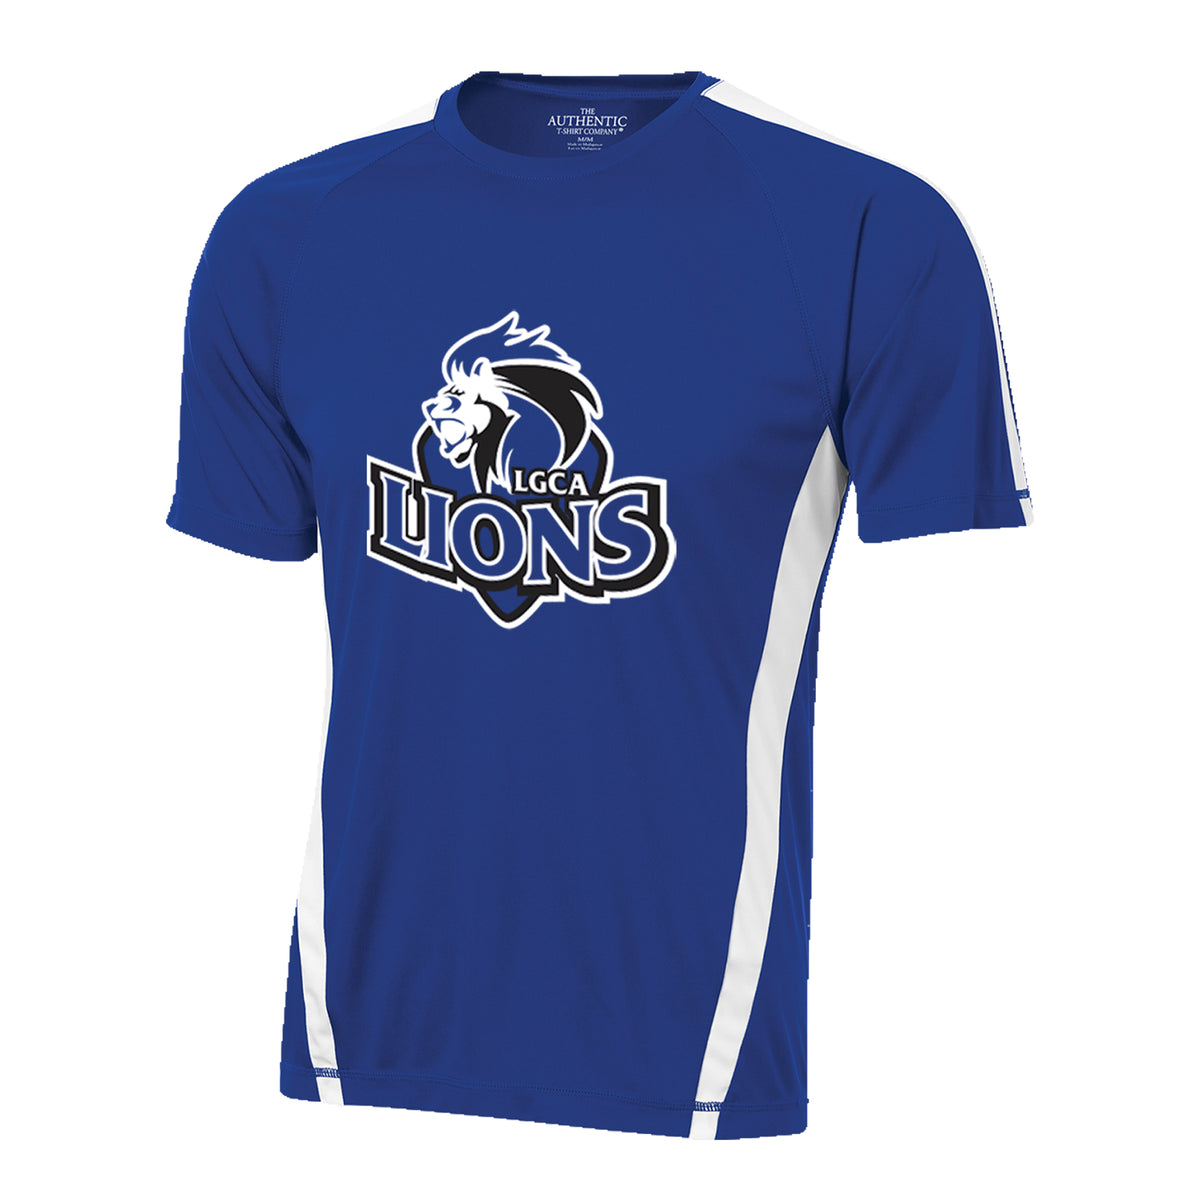 LIONS GATE 8-12 GYM T-SHIRT, WICKING, ADULT